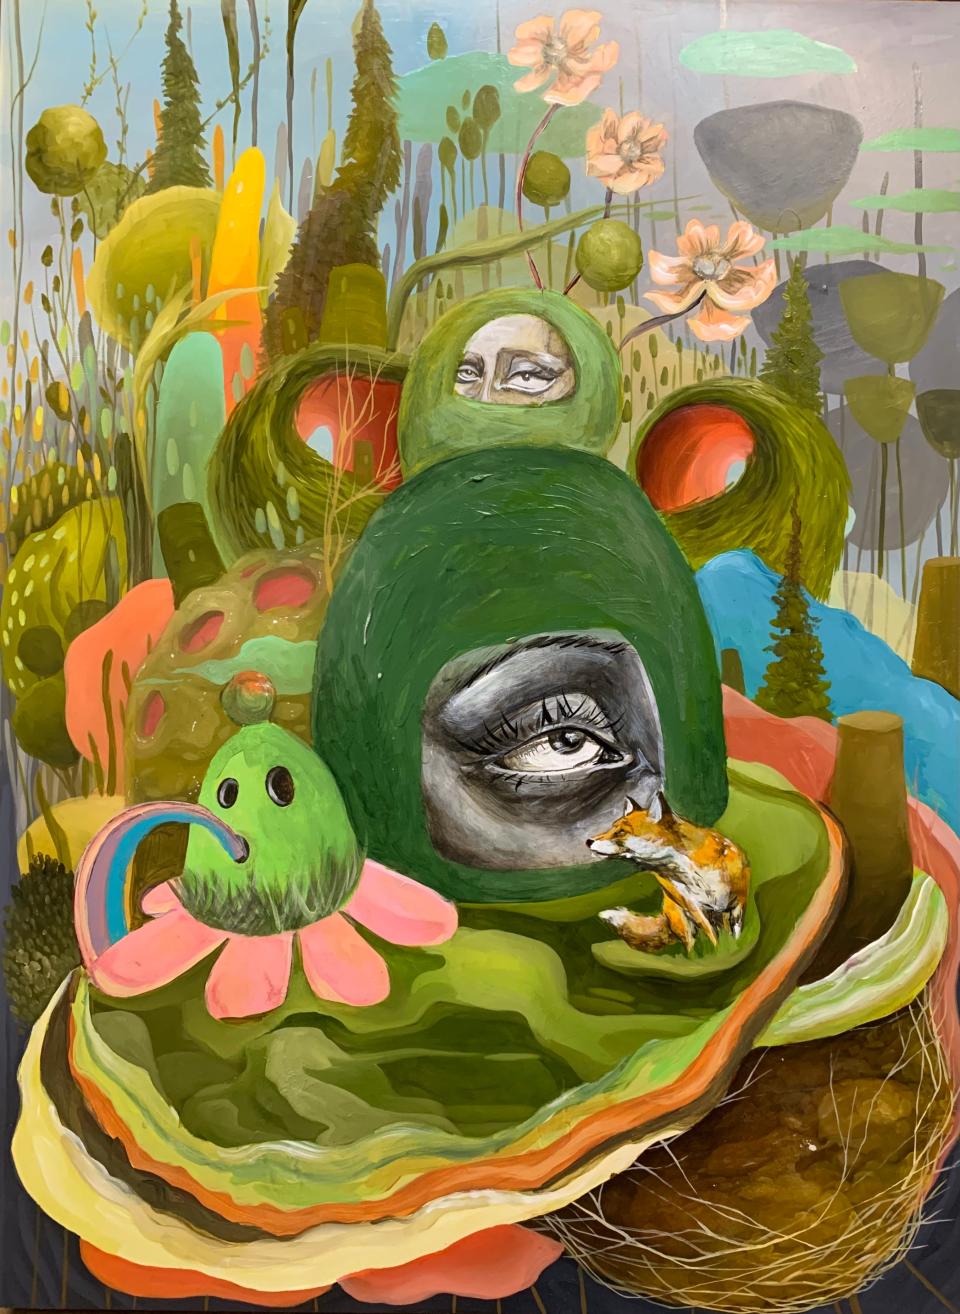 The Canton Museum of Art opened four new winter exhibitions on Nov. 25, including this painting from "Potion Park: The Kaleidoscopic Garden of Steve Ehret and Kat Francis." Ehret and Francis are local artists.